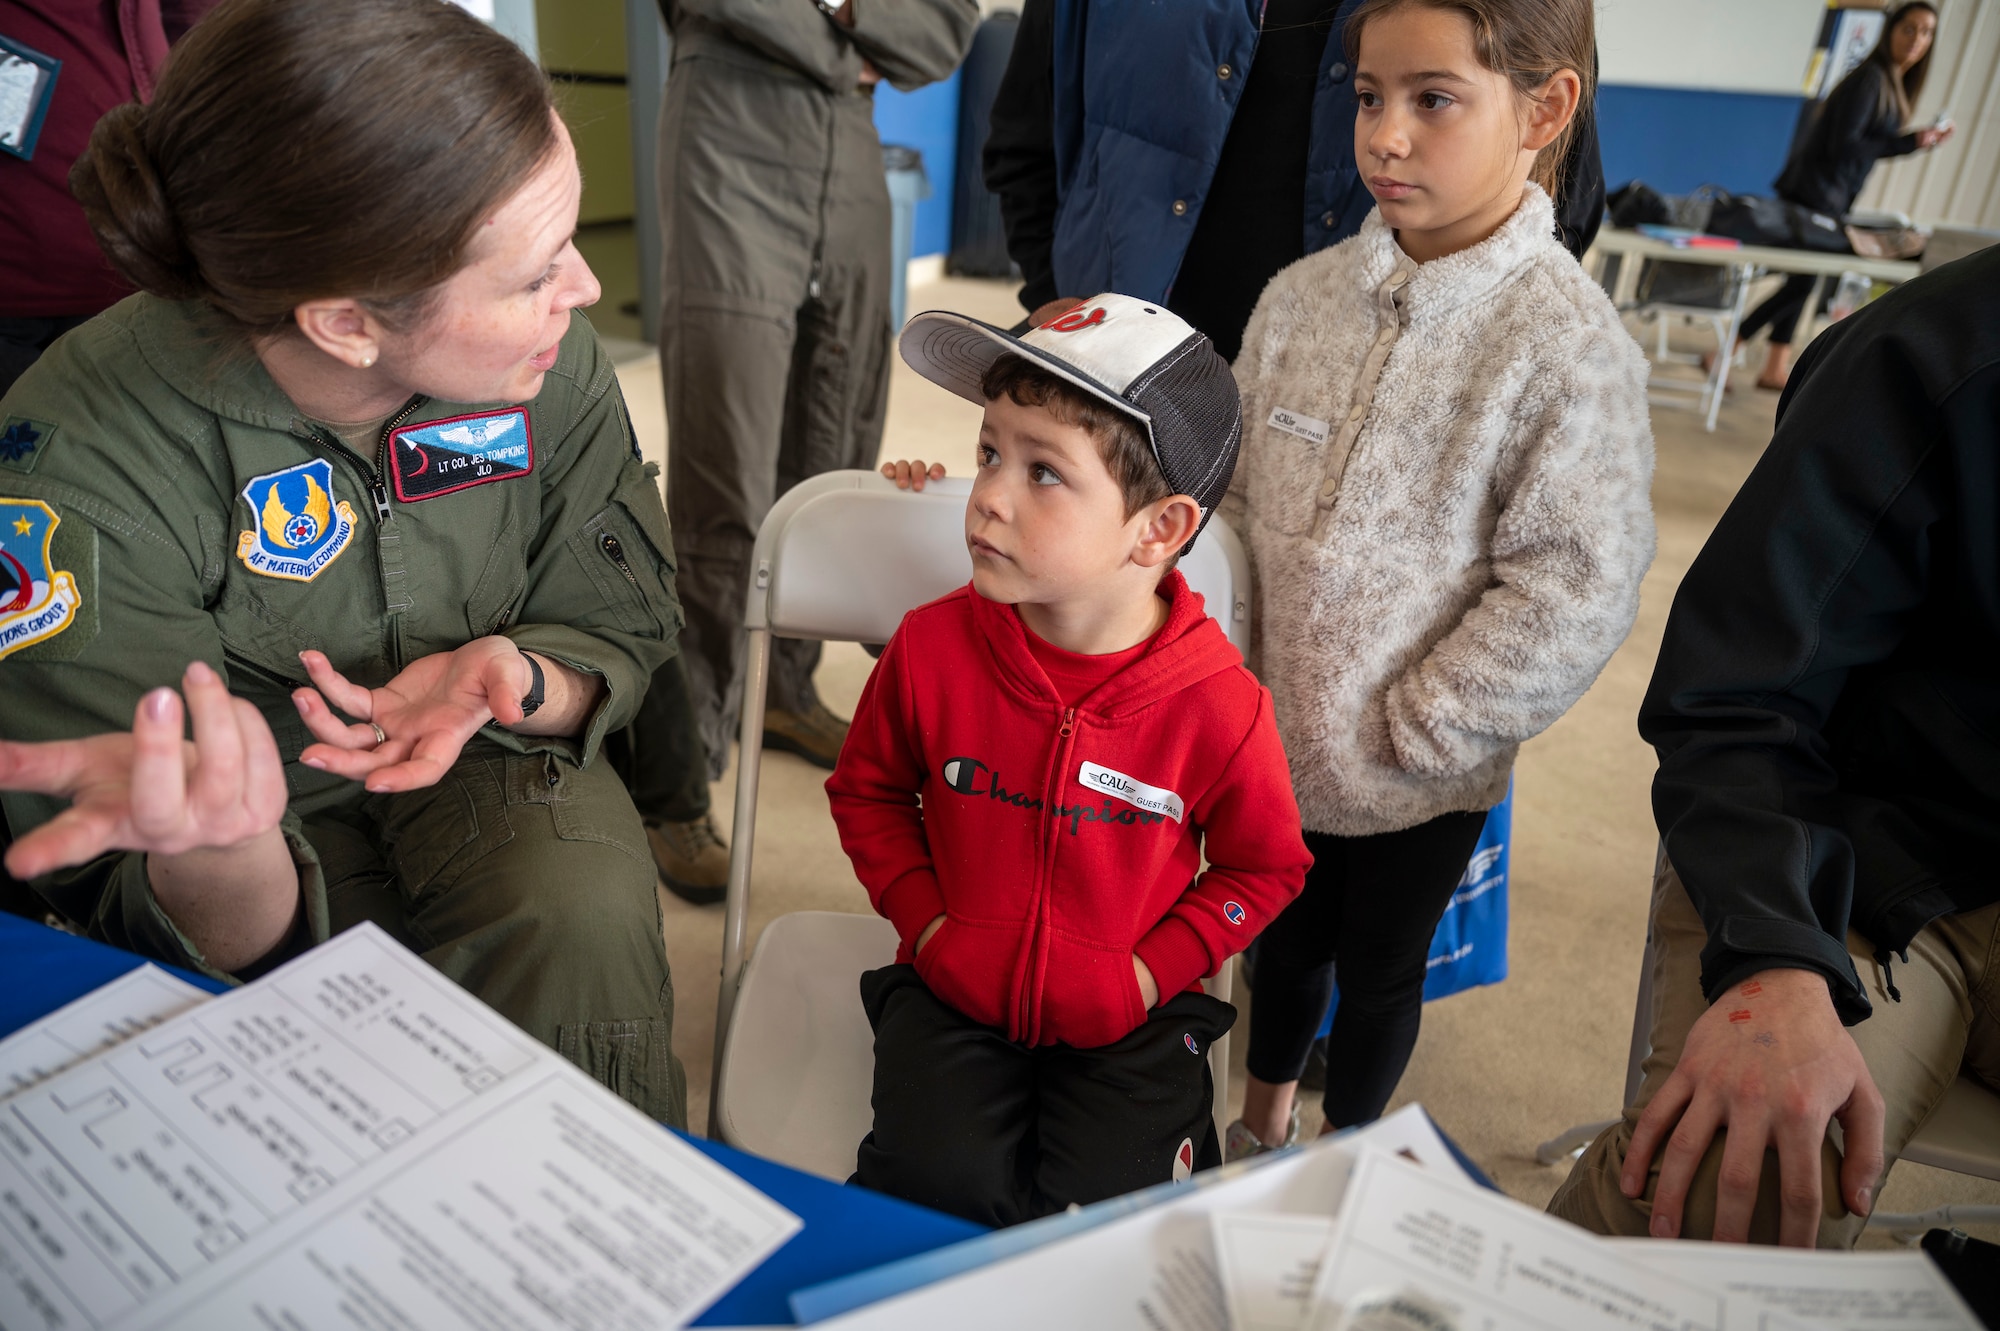 Lt. Col. Jessica Tompkins, Deputy Commander, 412th Operations Group teaches a young boy about how to use the flight simulator at California Aeronautical University Aviation Career Day.